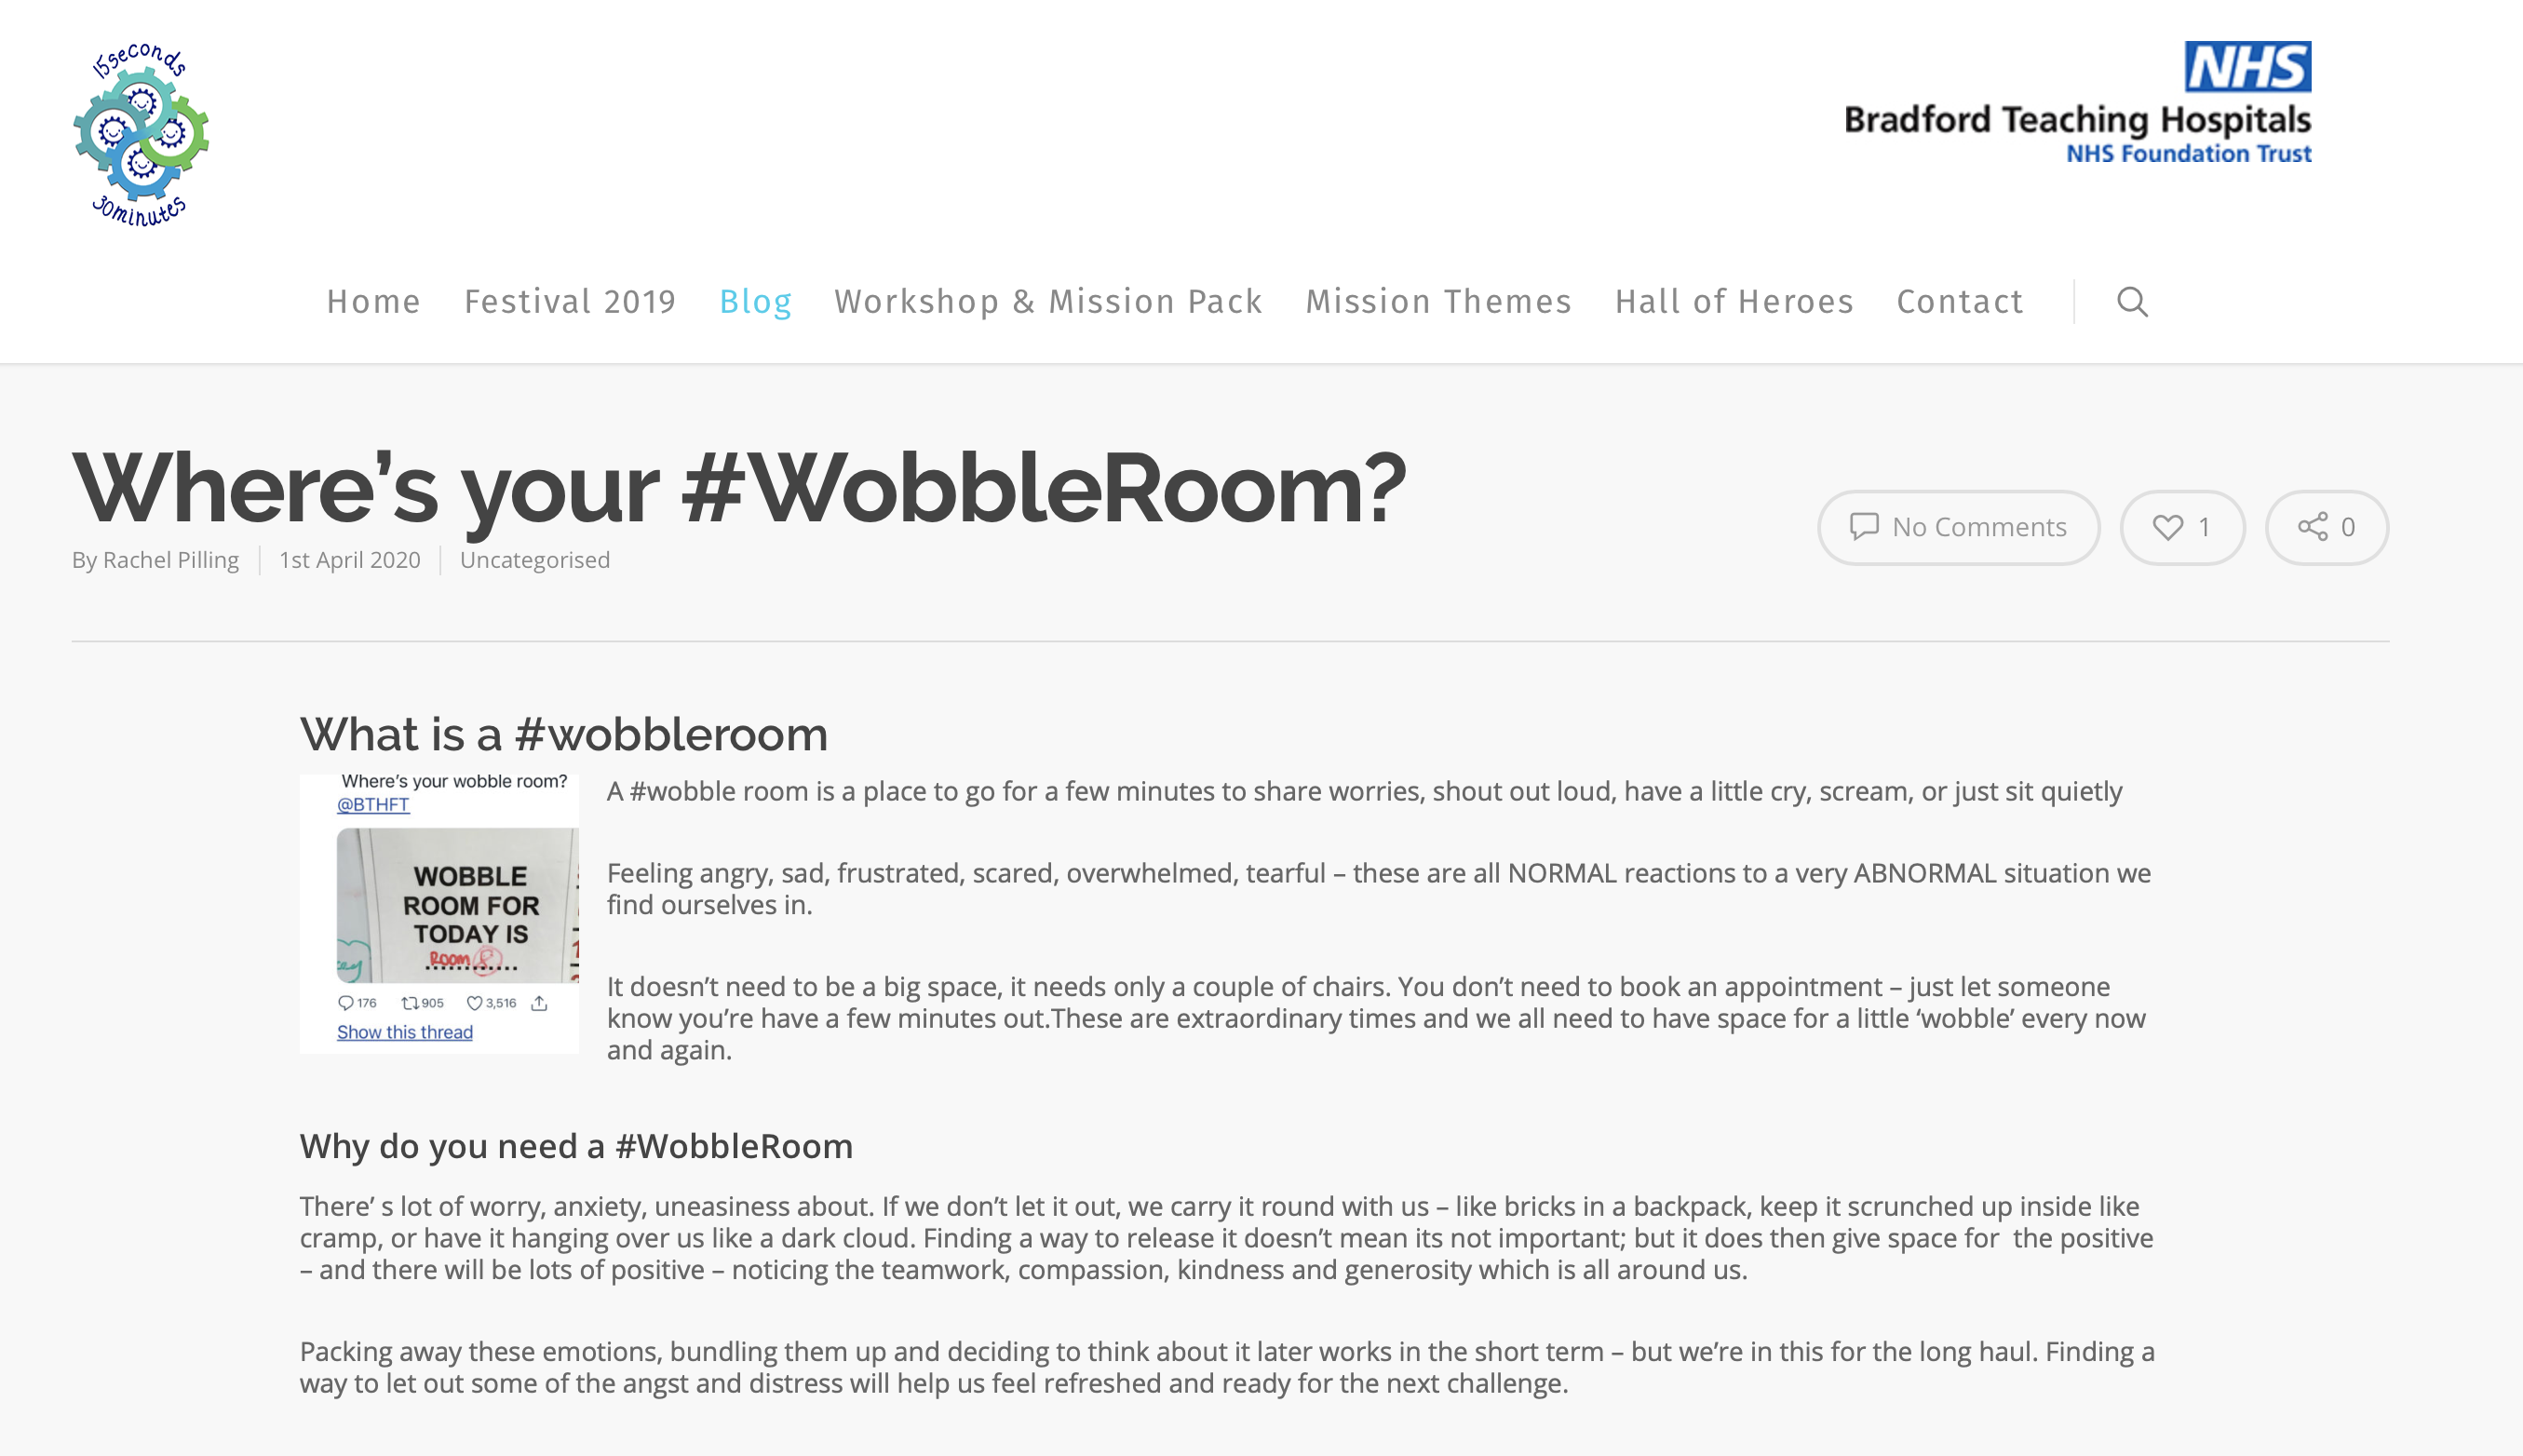 A great blog to help you set up your Wobble Room - a COVID19 must have featured image